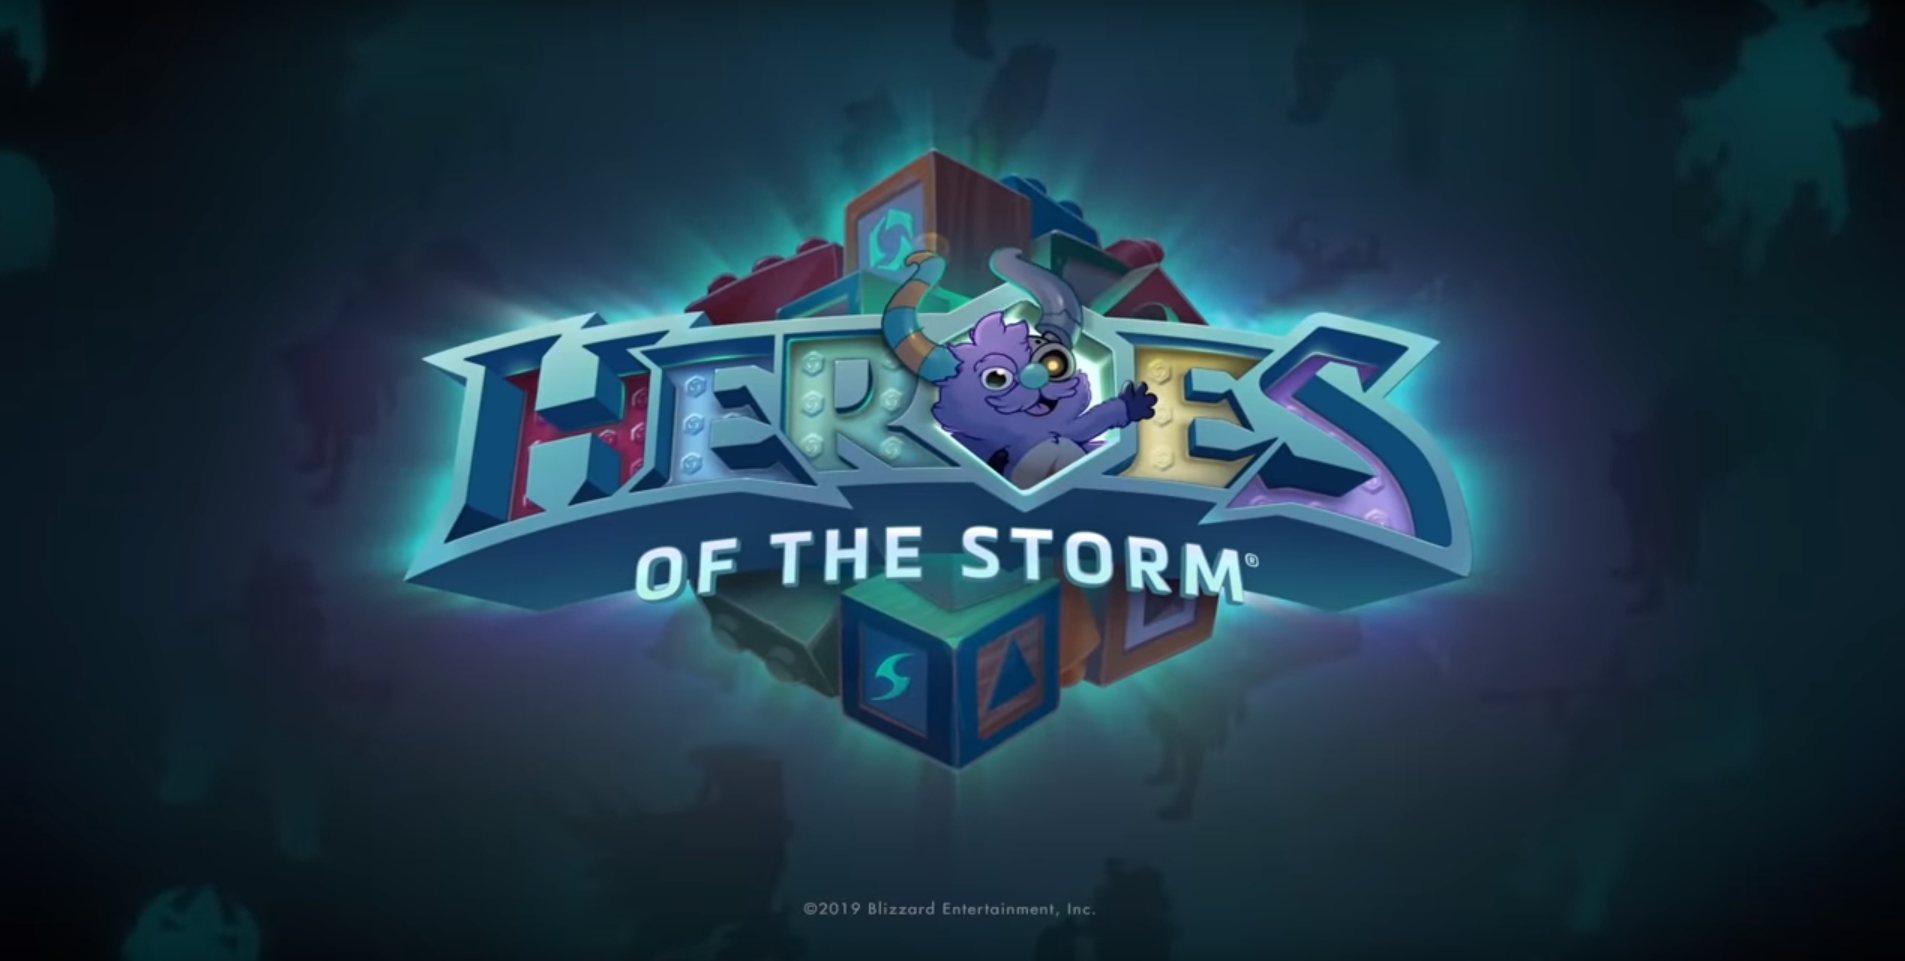 Blizzard Teases Upcoming Content Linked To The Raven Lord In Heroes Of The Storm